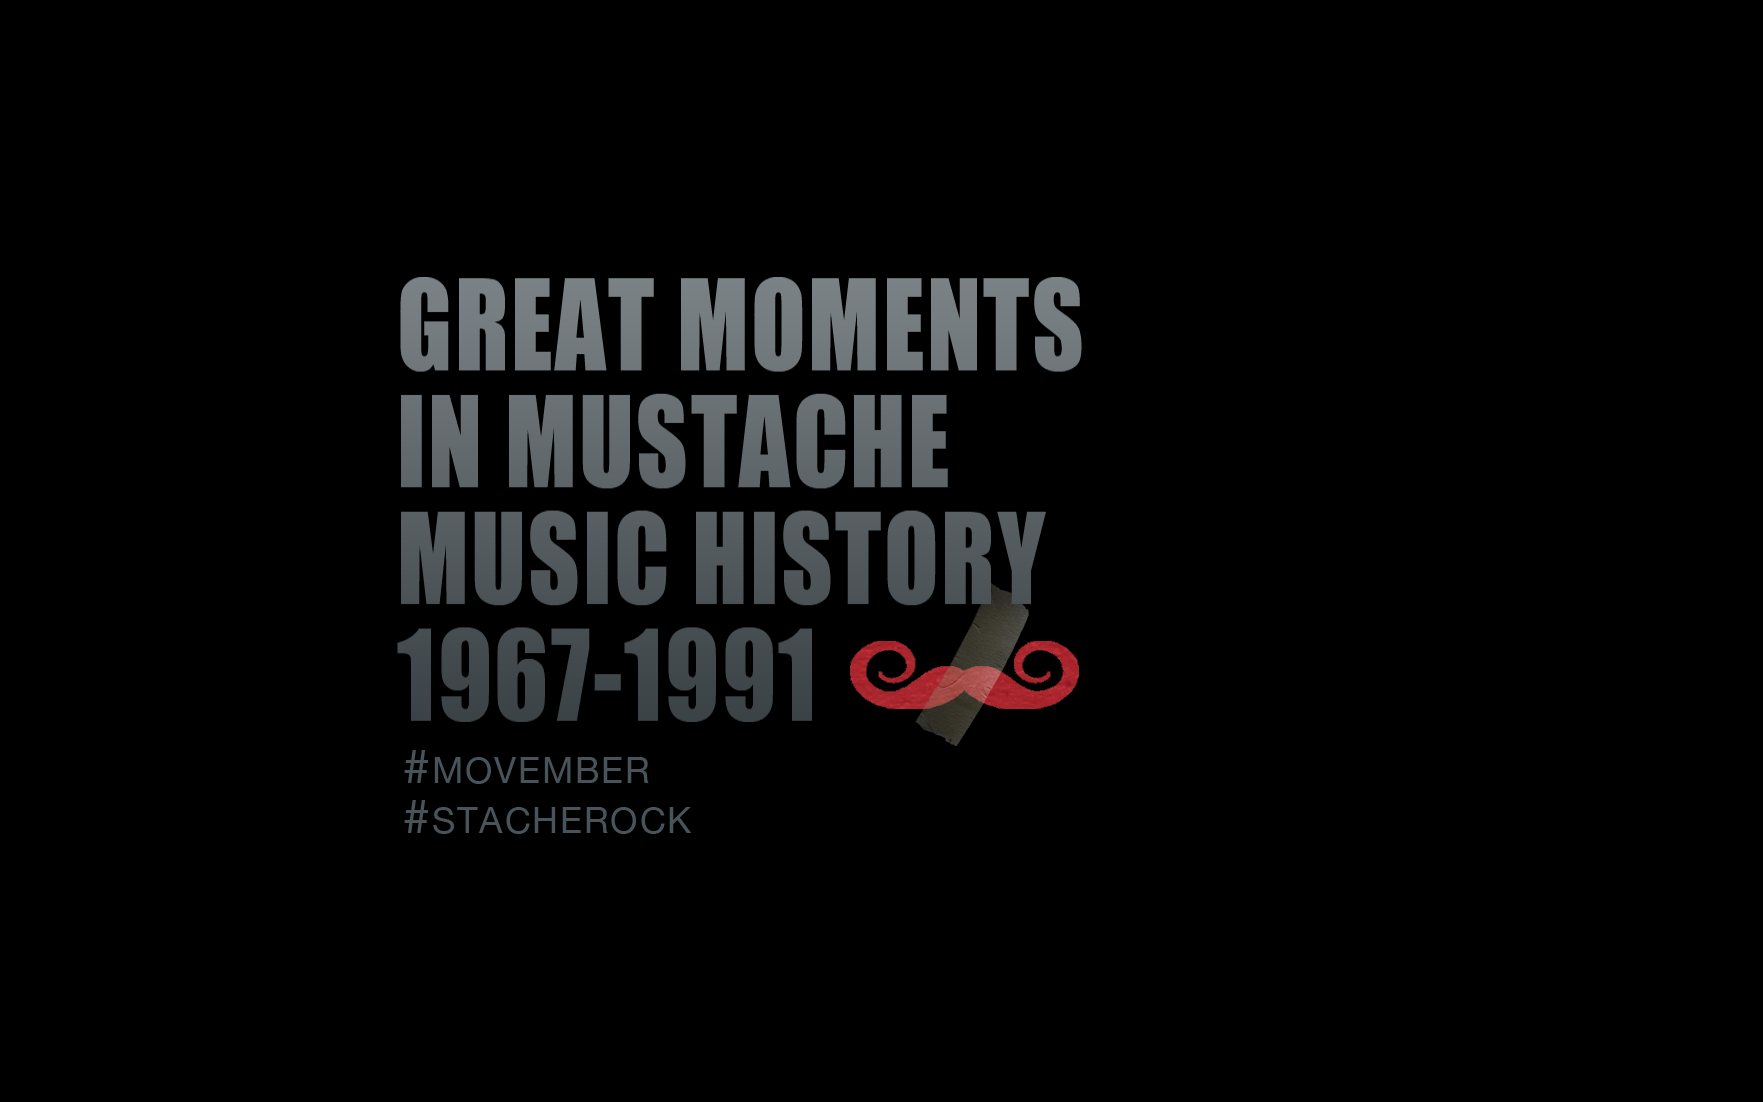 Great Moments in Mustache Music History: 1967-1991